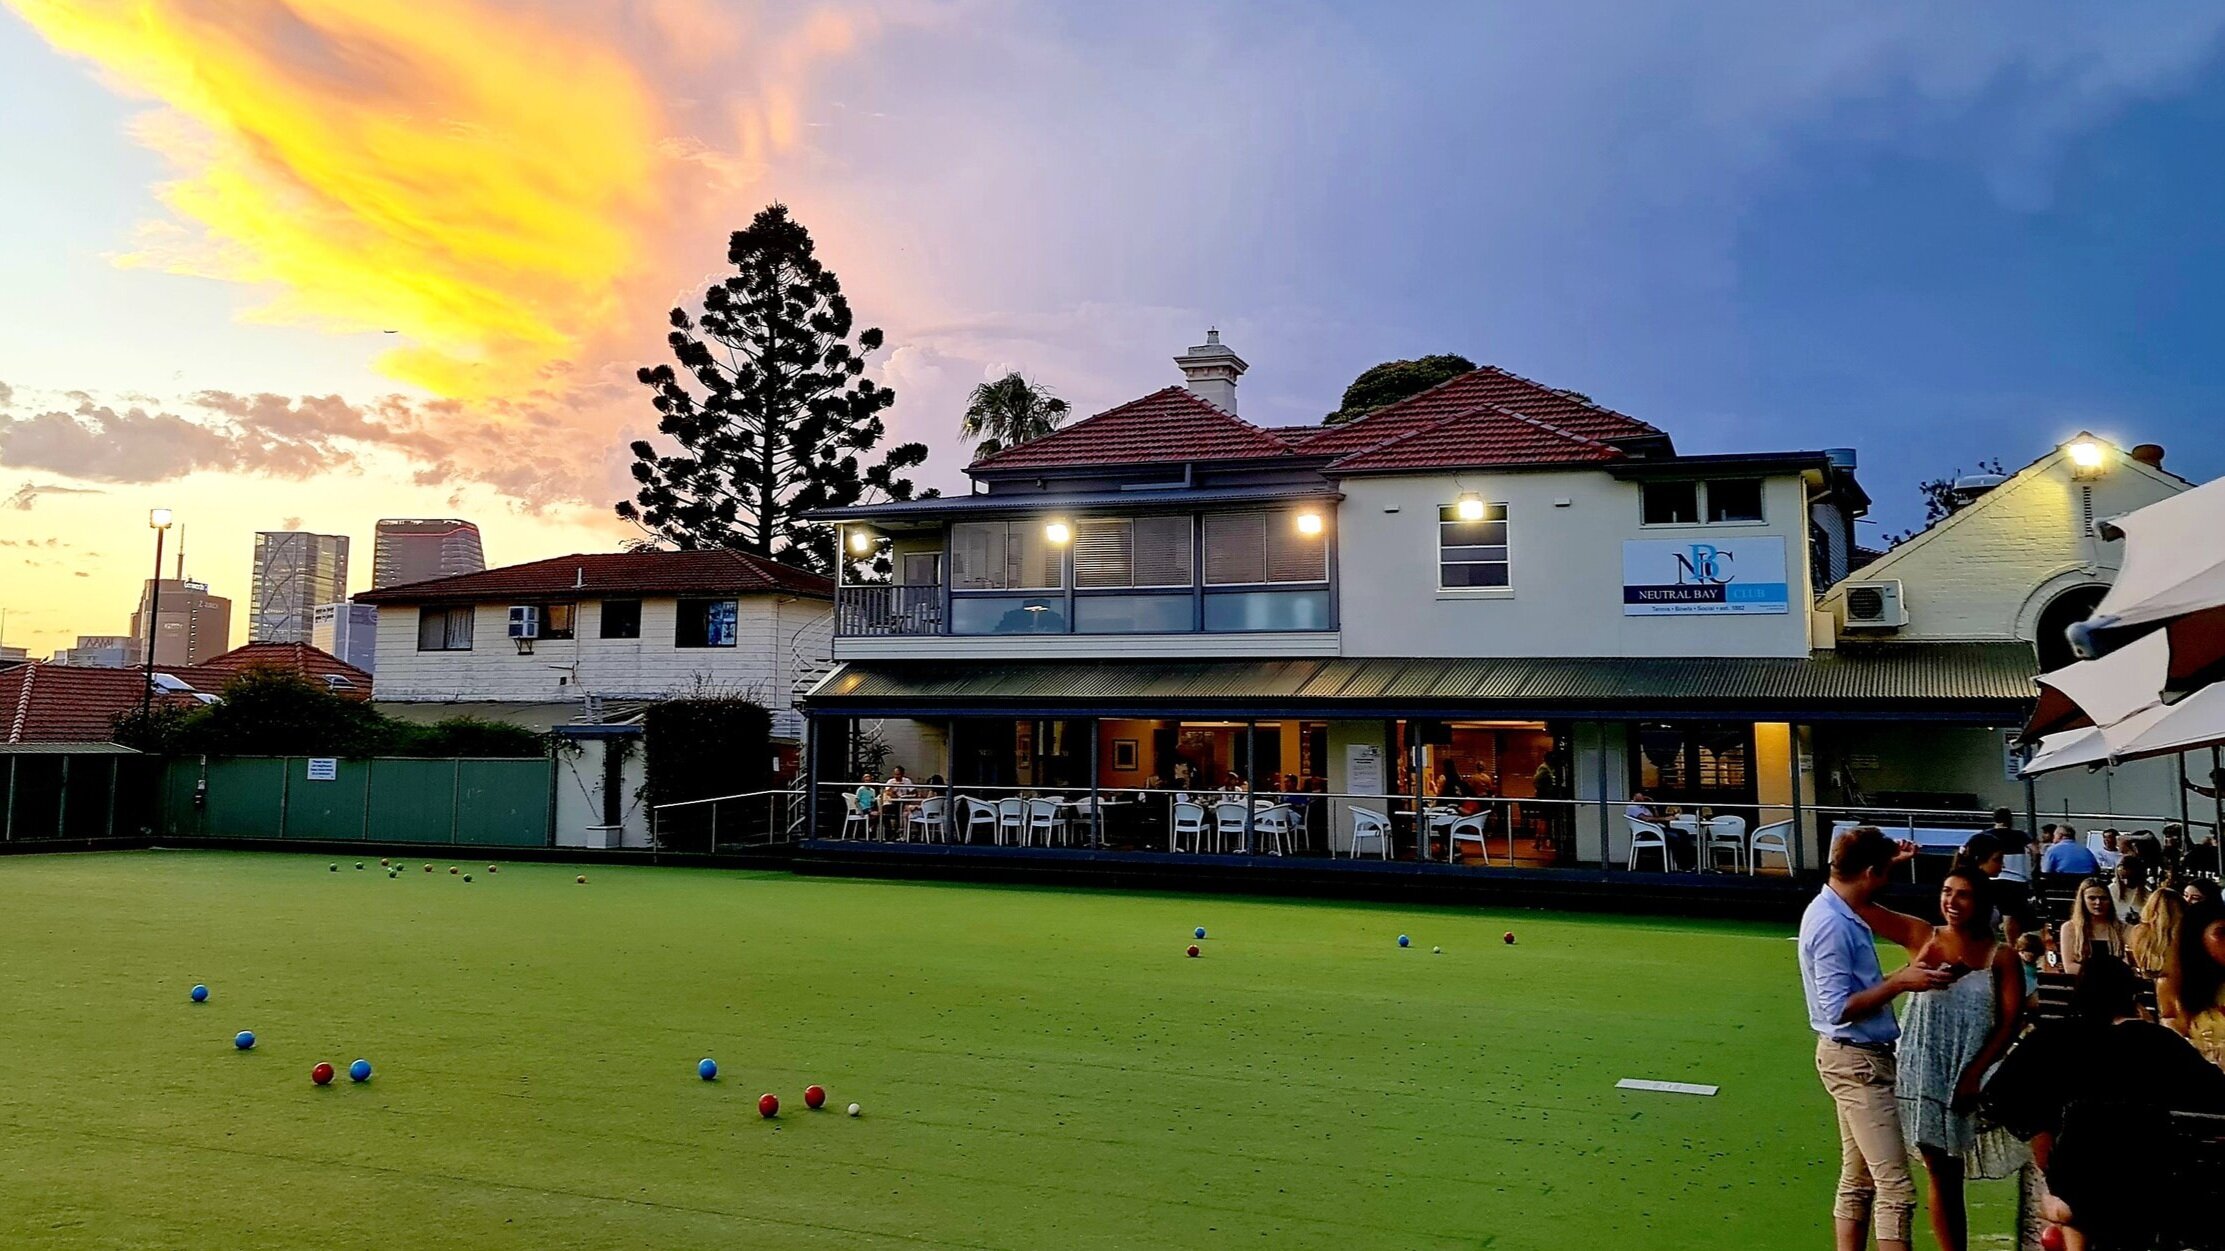 The Neutral Bay Club - Tennis | Bowls | Social - Come out and play!